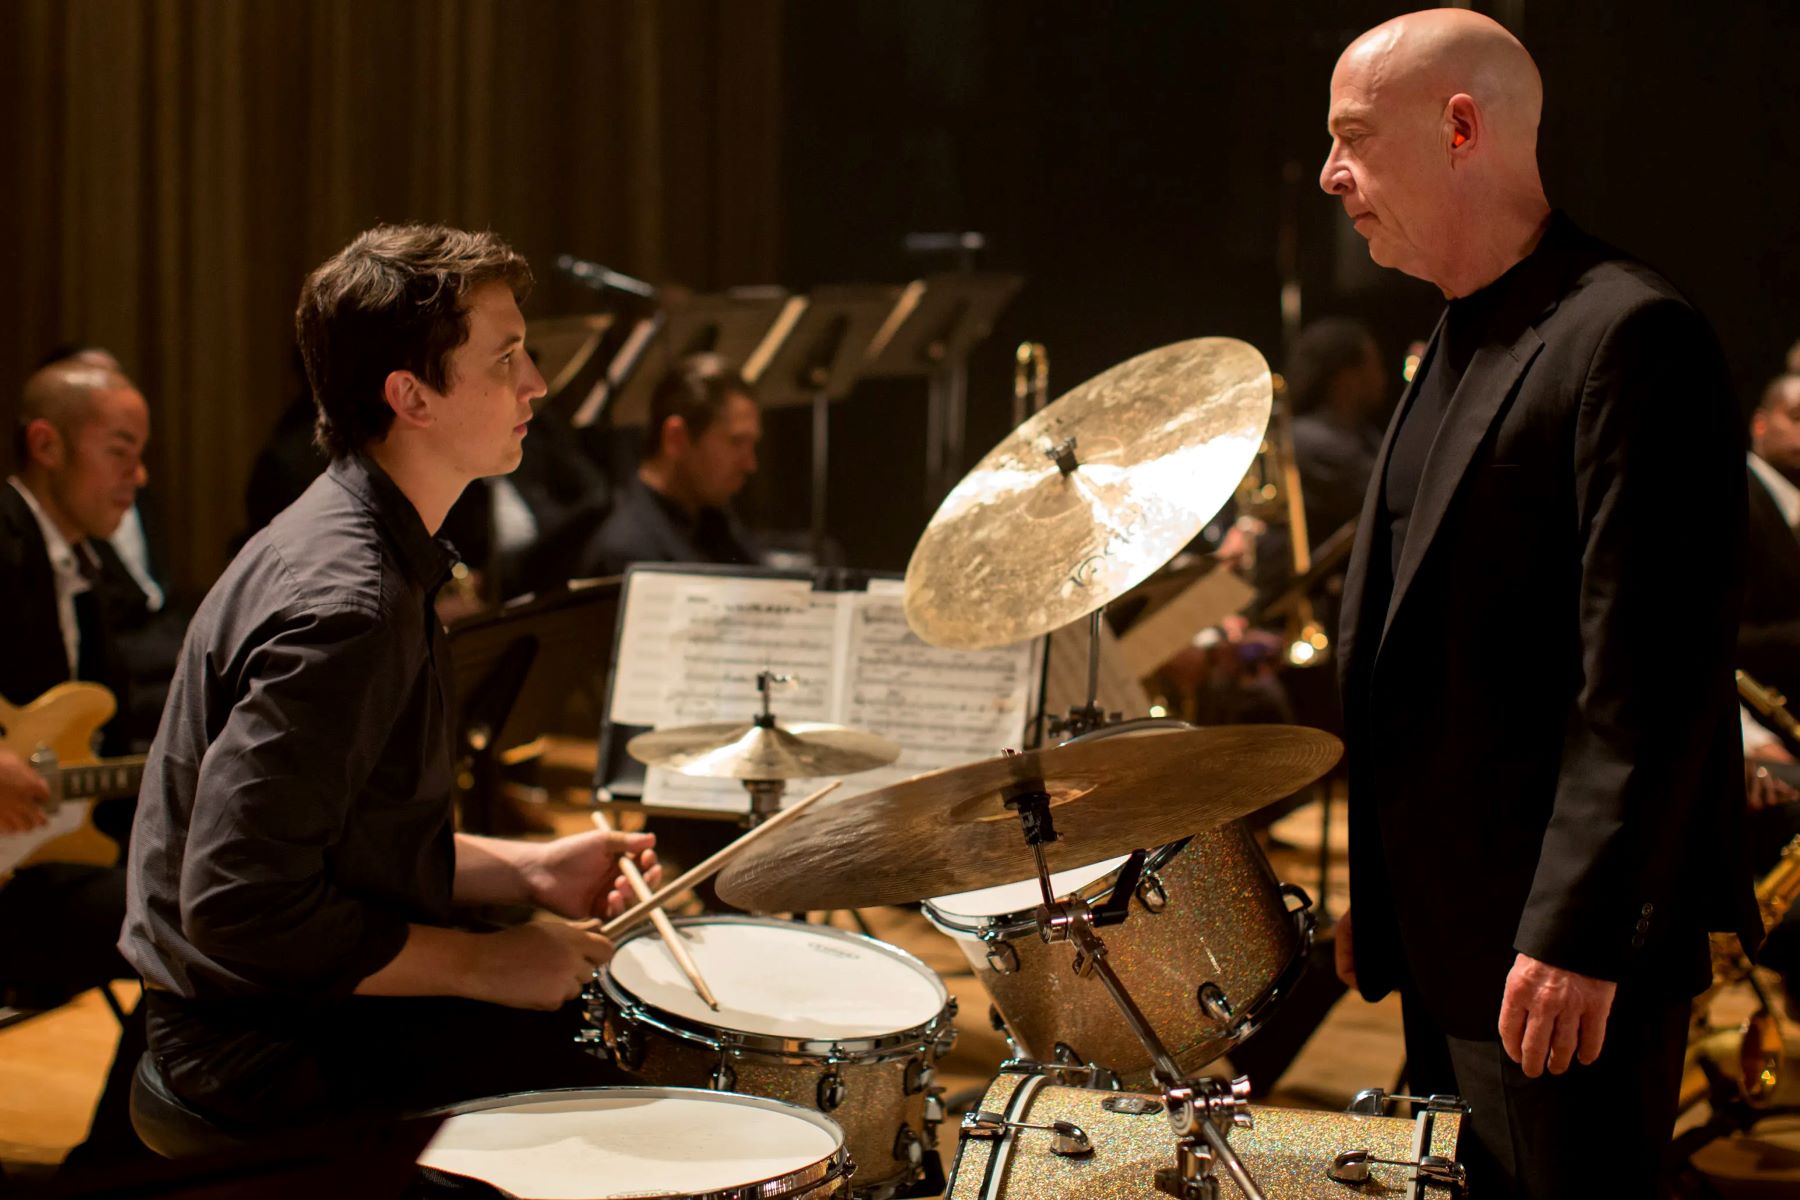 Who Played Drums For “Whiplash”?